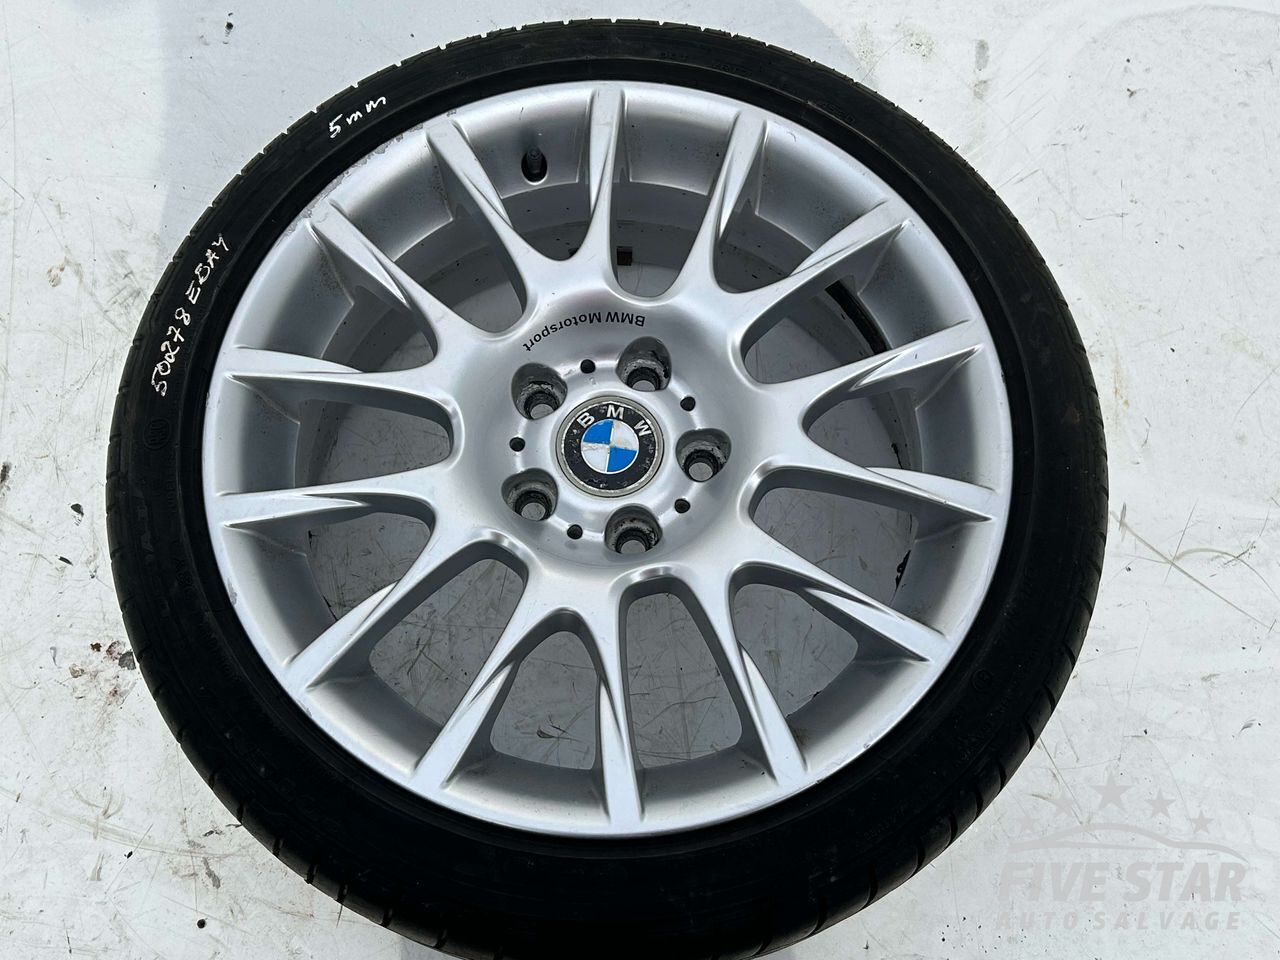 BMW 3 Series R18 Alloy Wheel With Tire 2008 Estate 4/5dr 6770494 (07-10) 320d